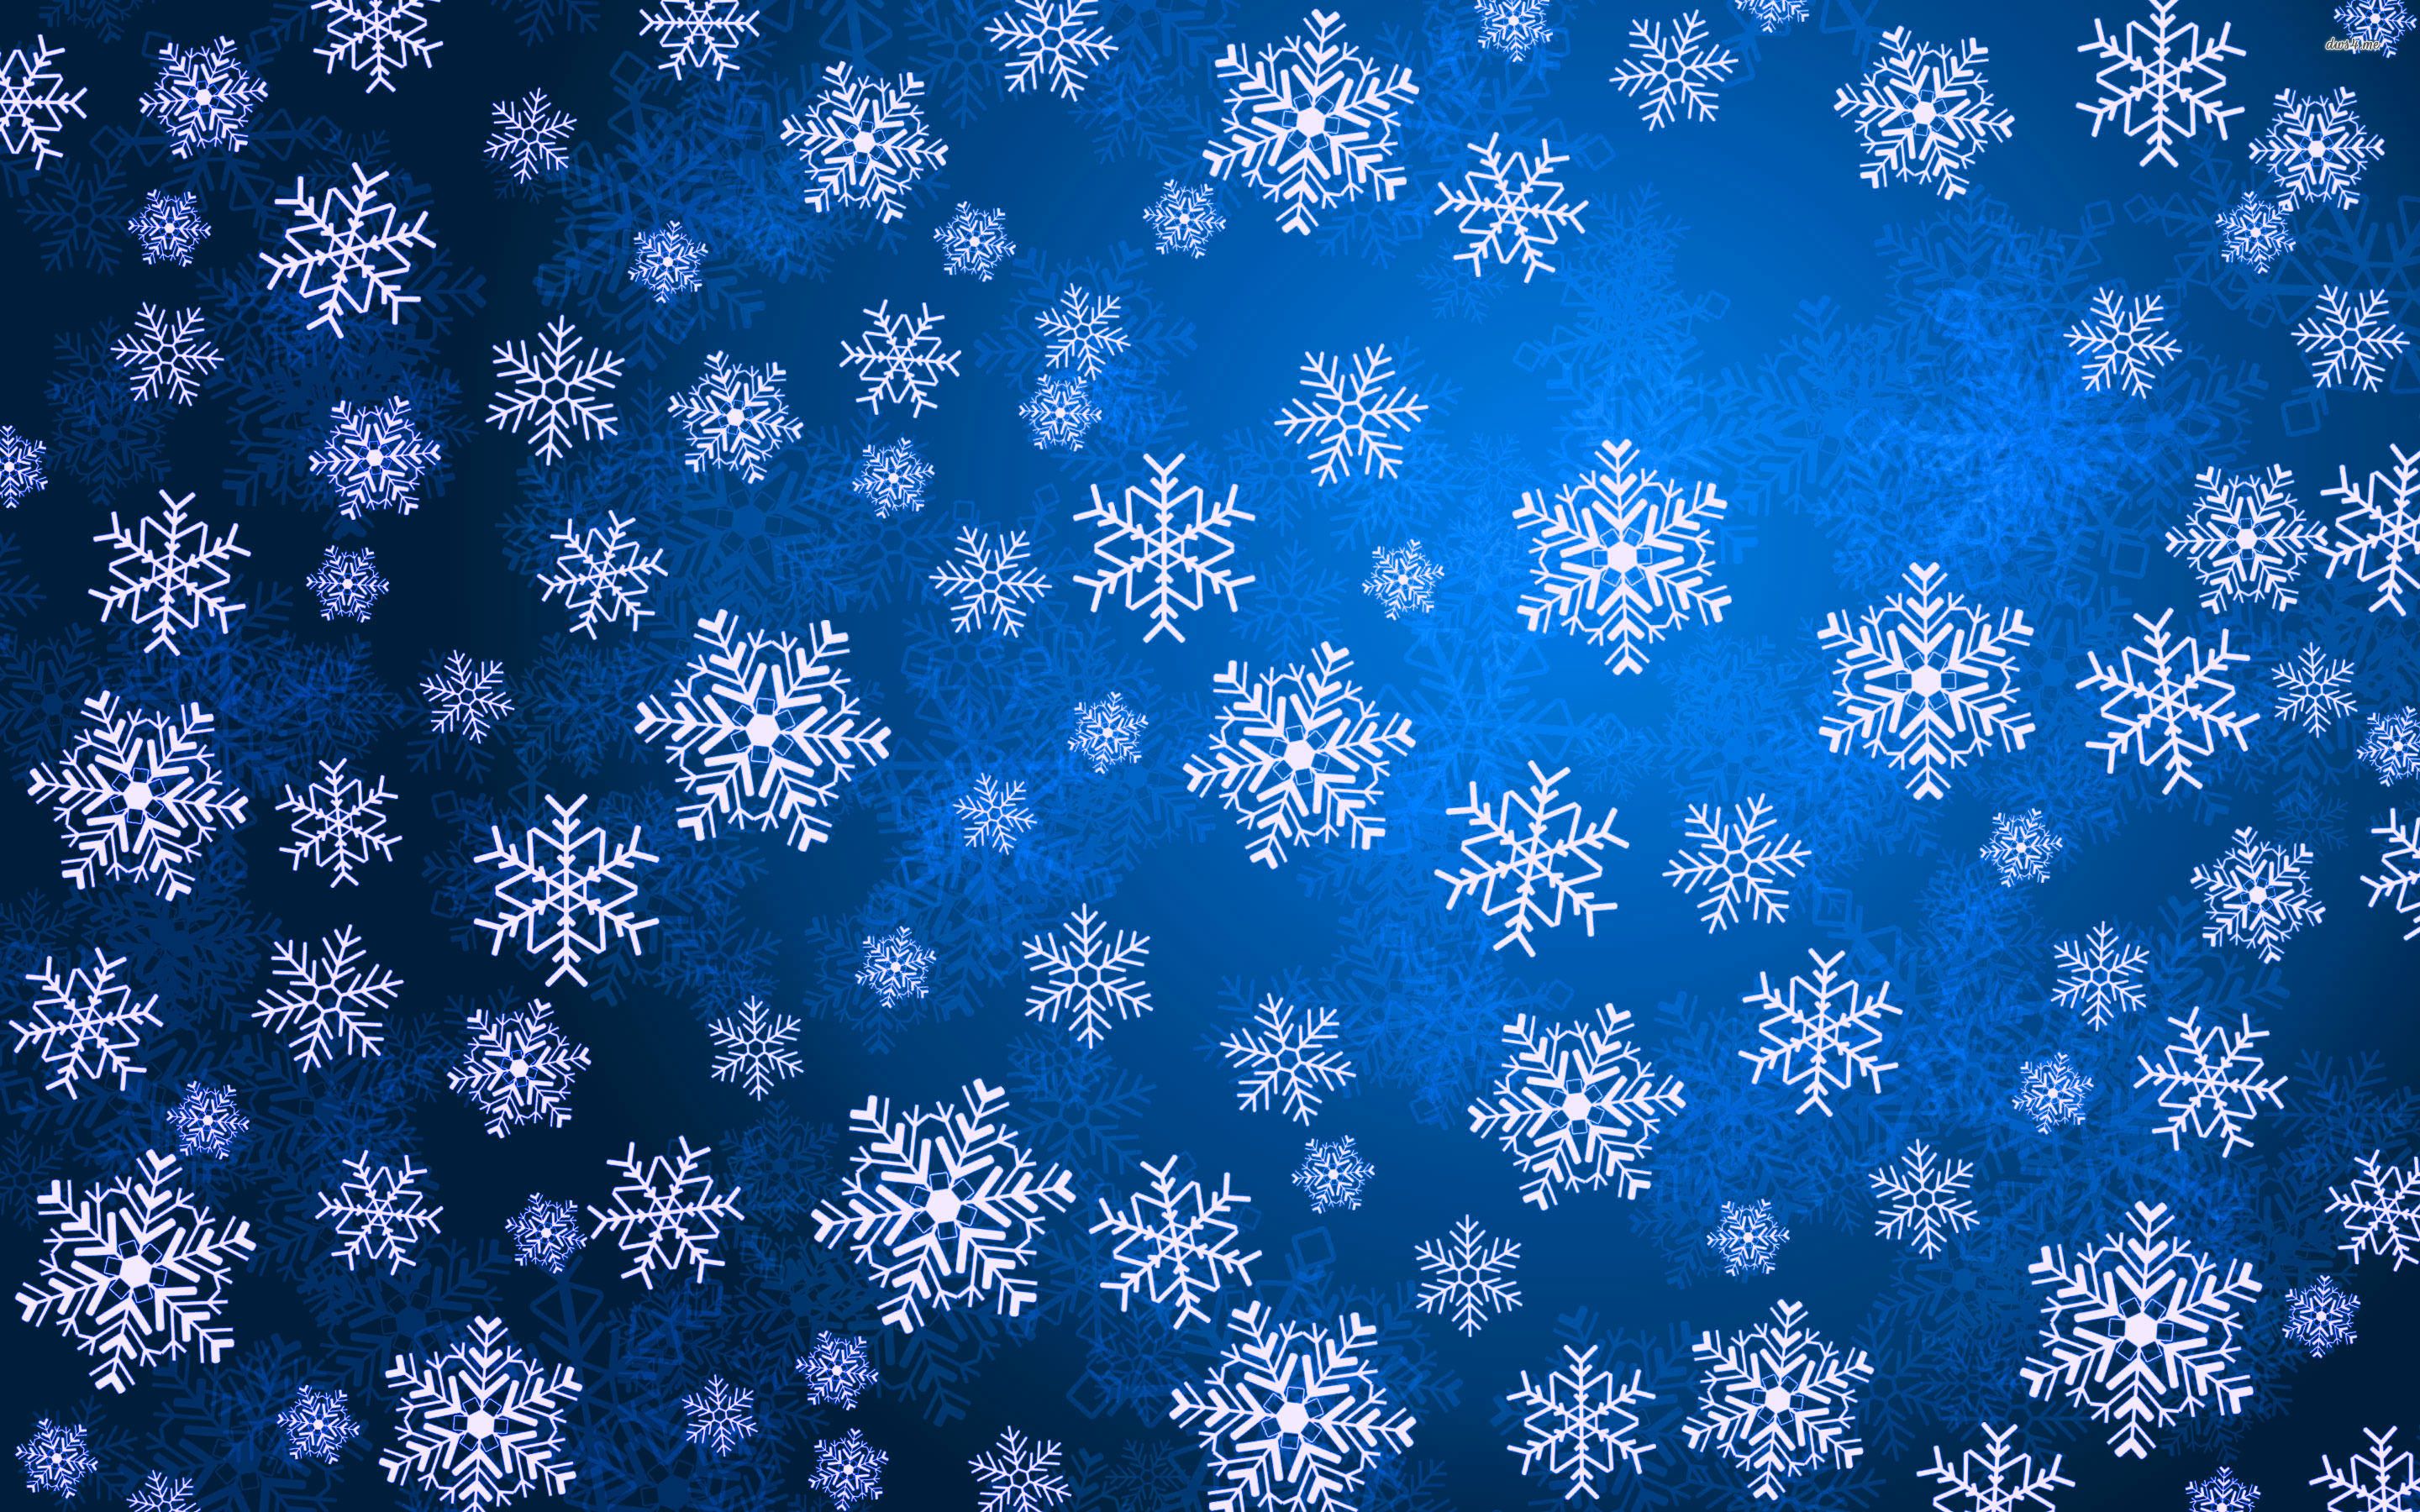 Christmas baubles and snowflakes wallpaper